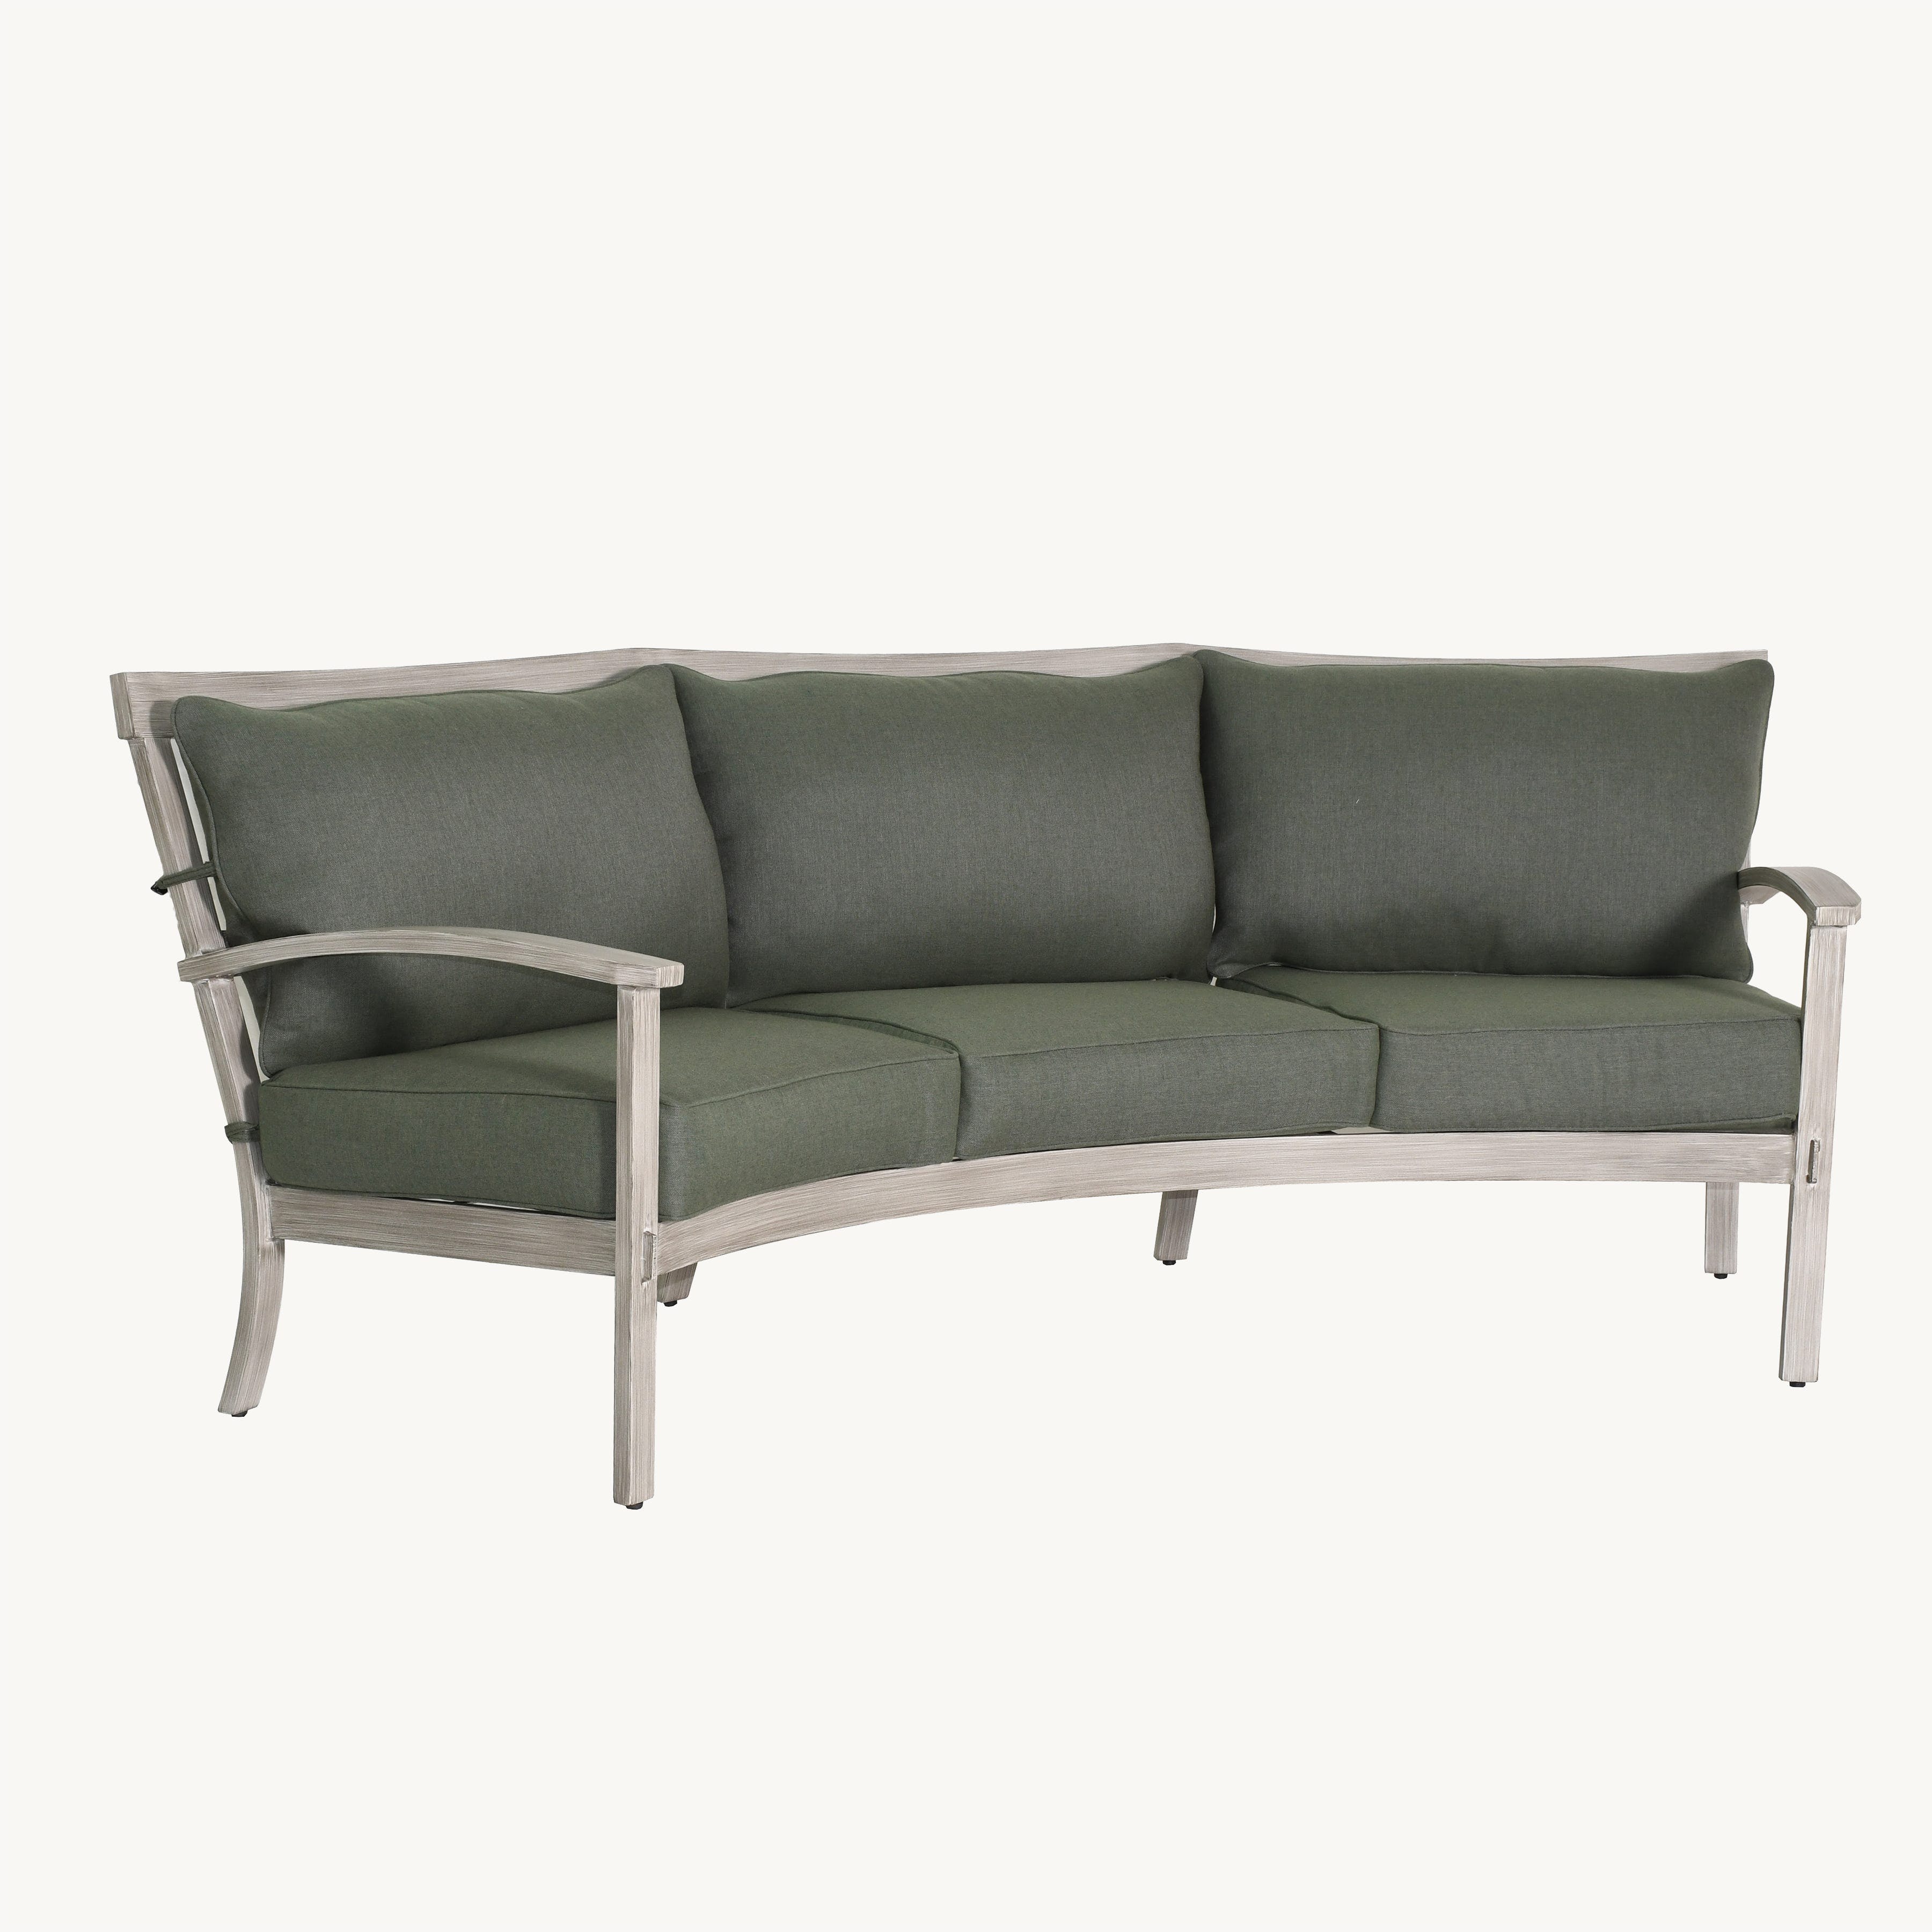 Antler Hill Cushioned Crescent Sofa By Castelle